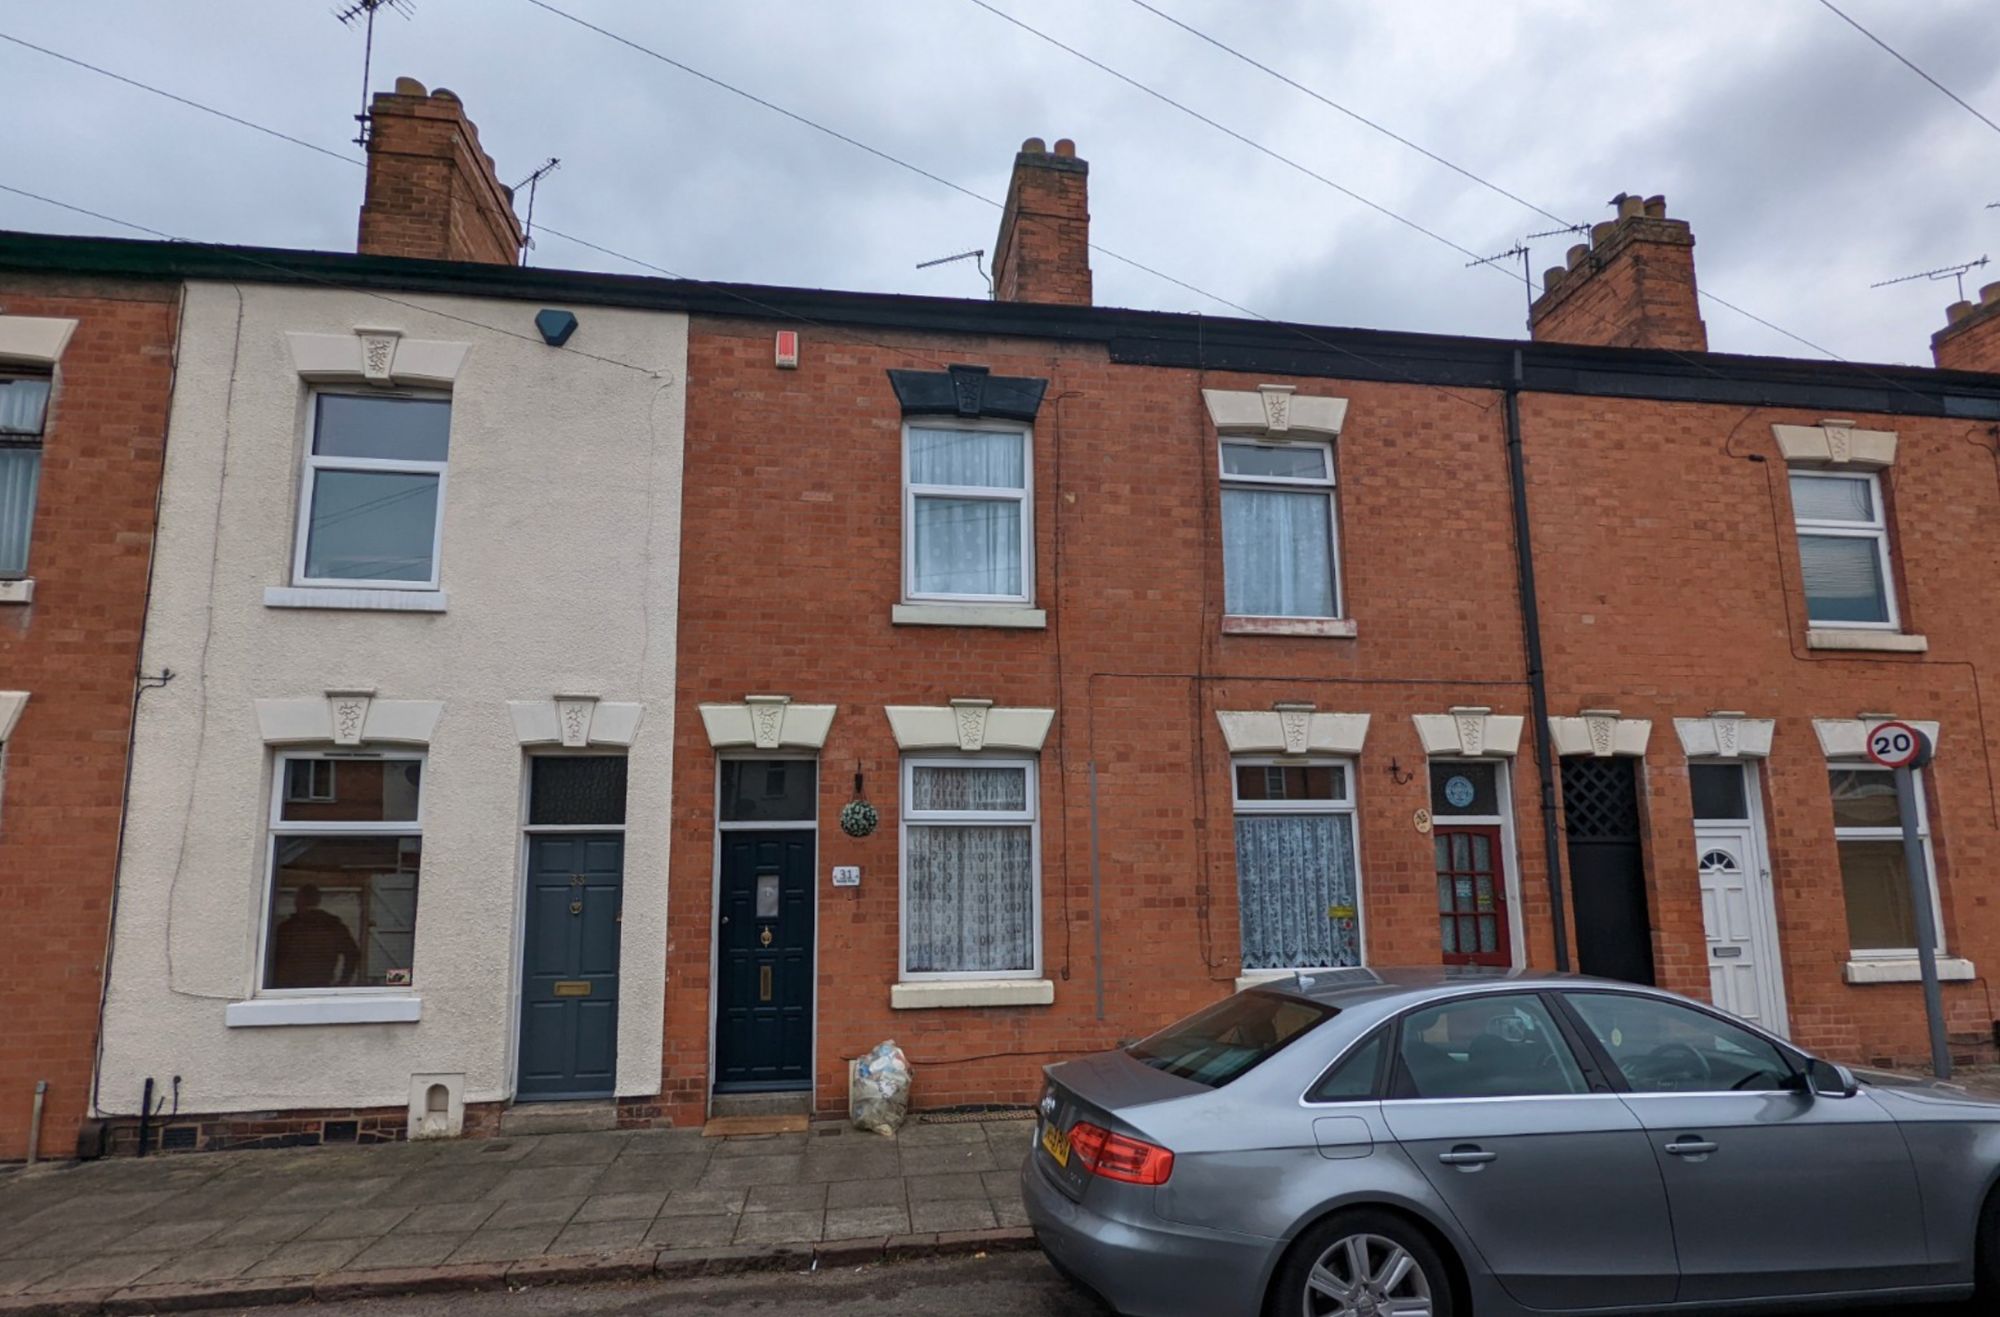 Off Market, Below Market Value, Buy To Let in Leicester